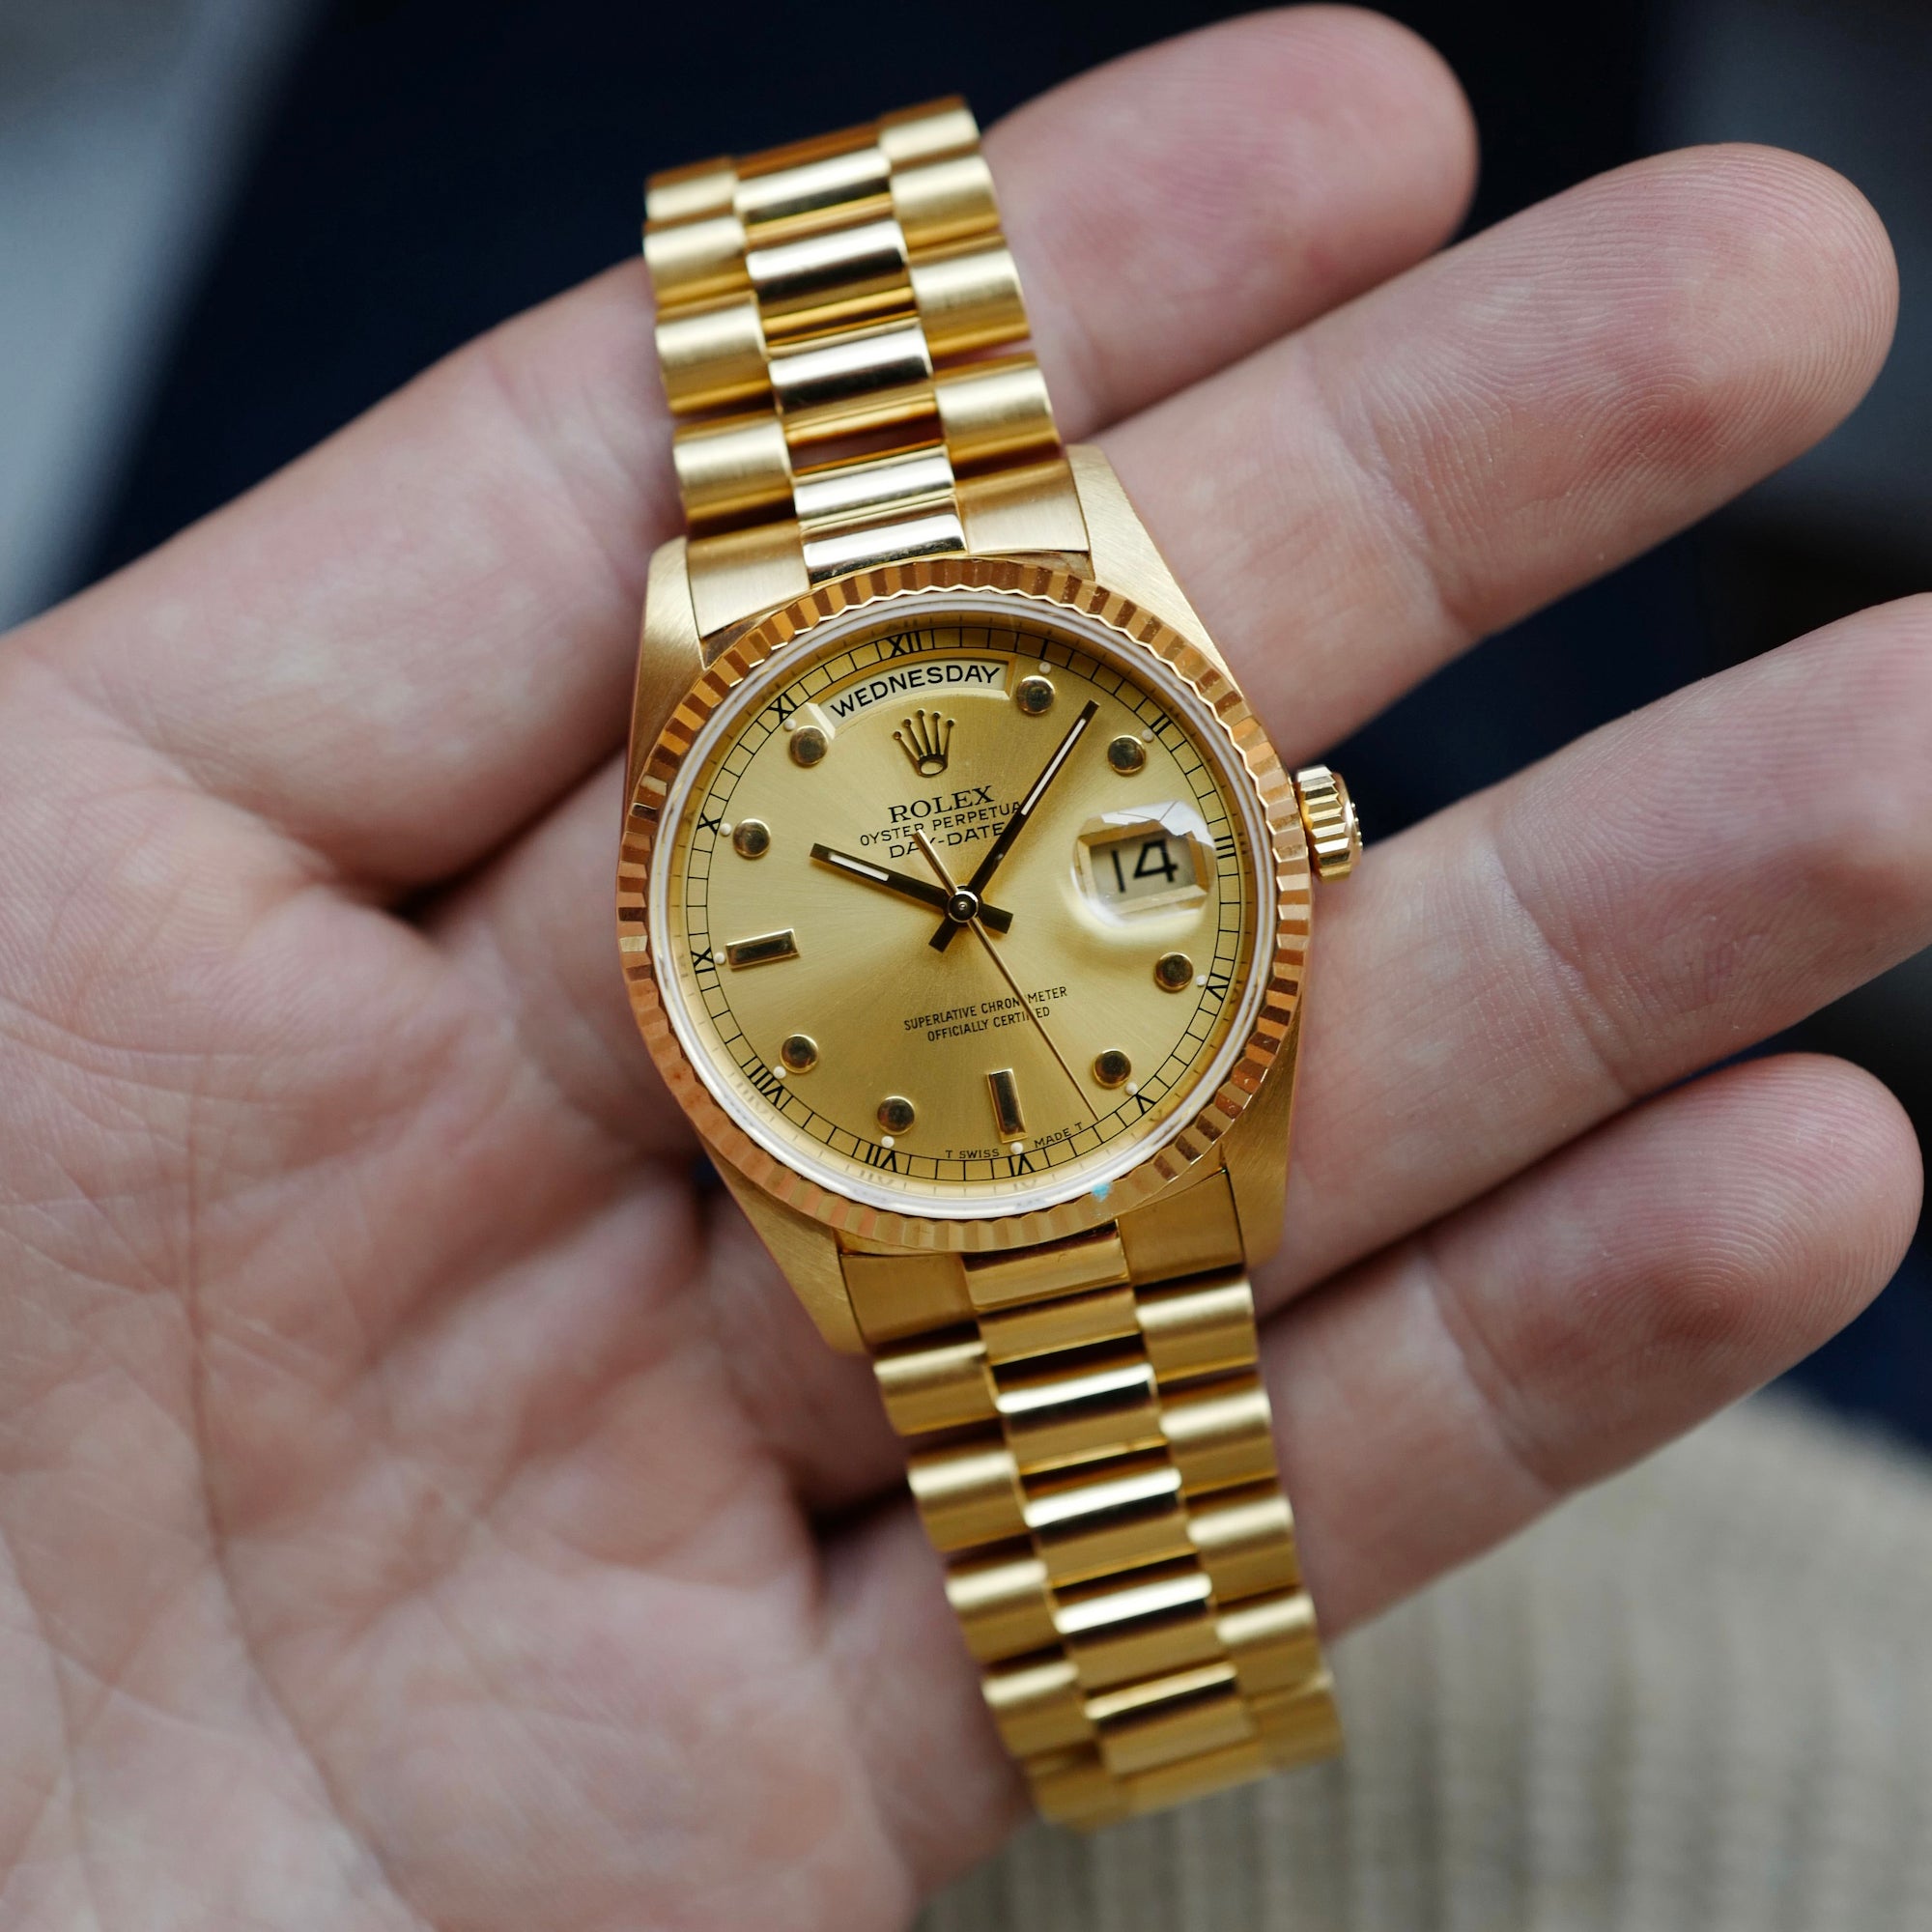 Rolex - Rolex Yellow Gold Day Date Ref. 18238 with Pinball Dial - The Keystone Watches